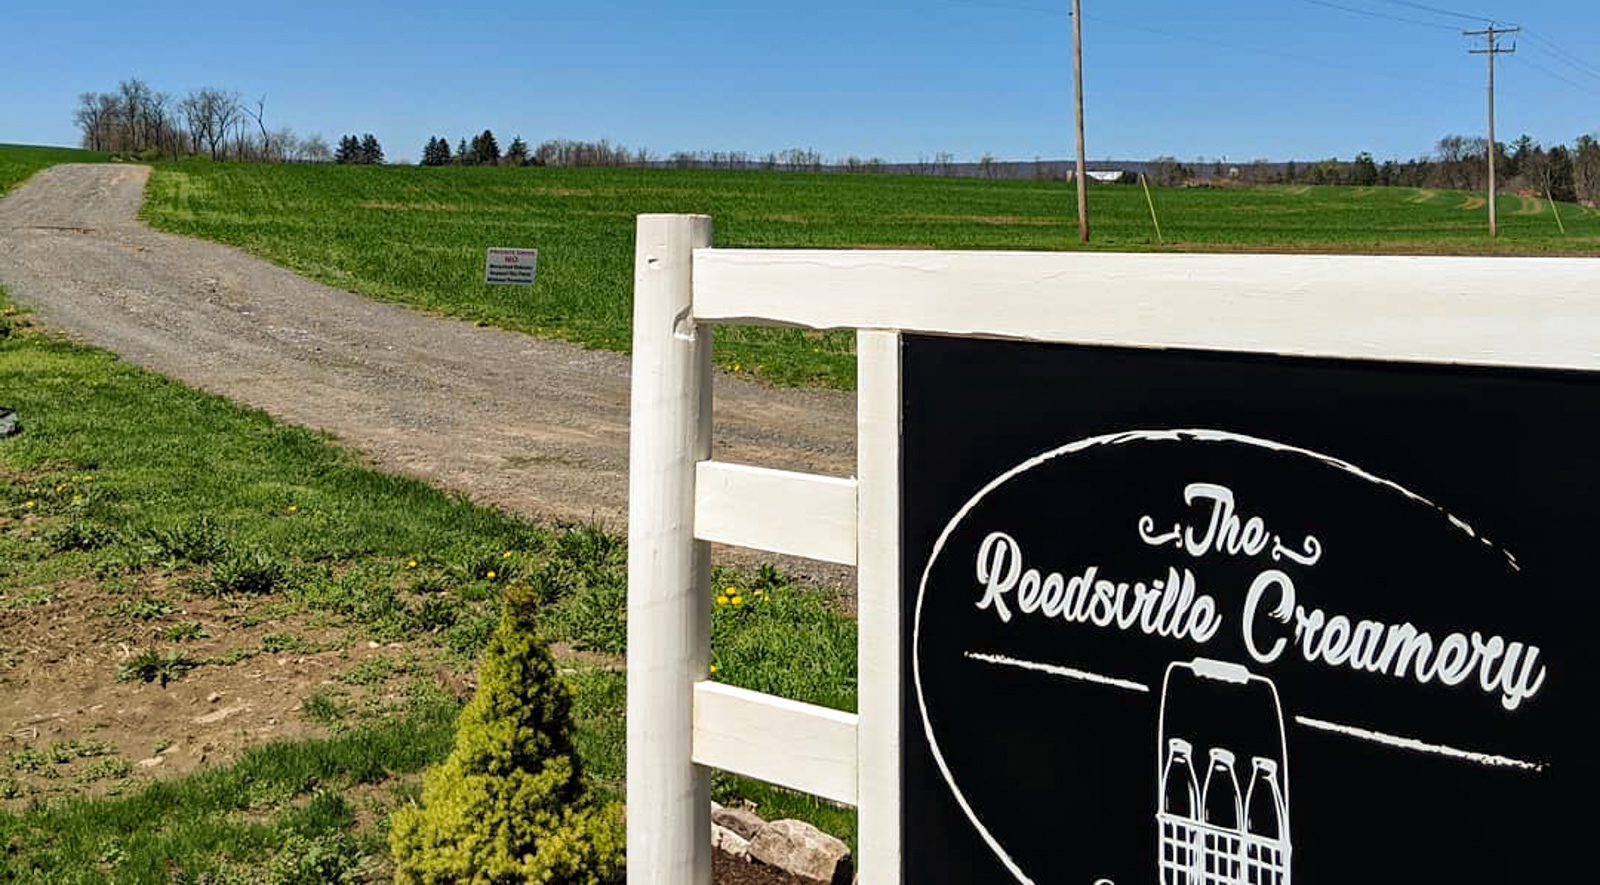 contact the reedsville creamery